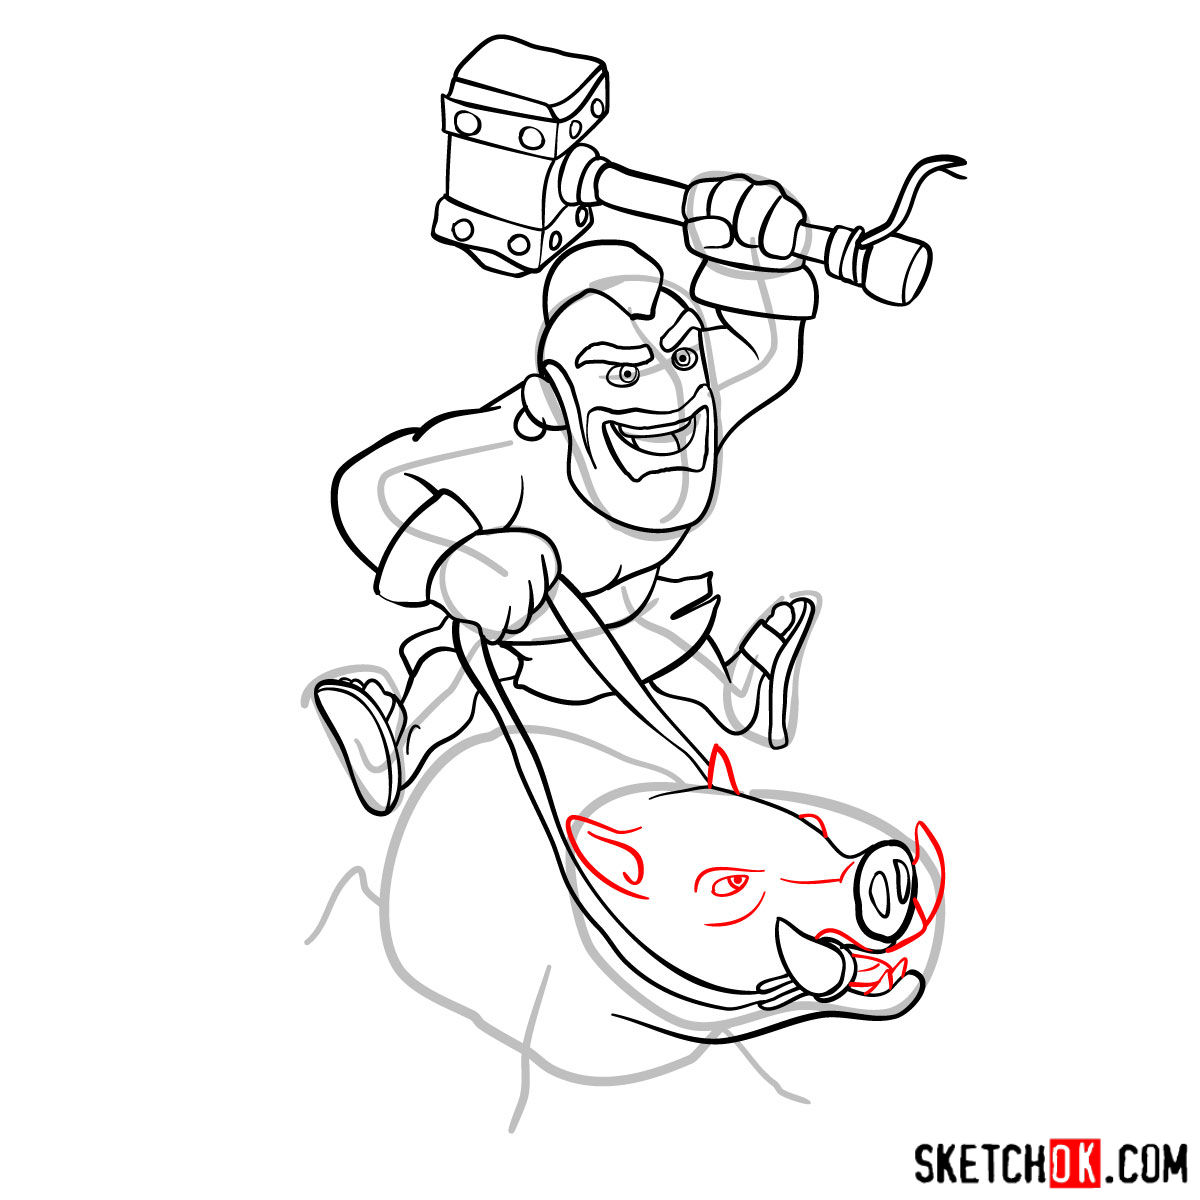 How to draw Hog Rider from Clash of Clans - step 11